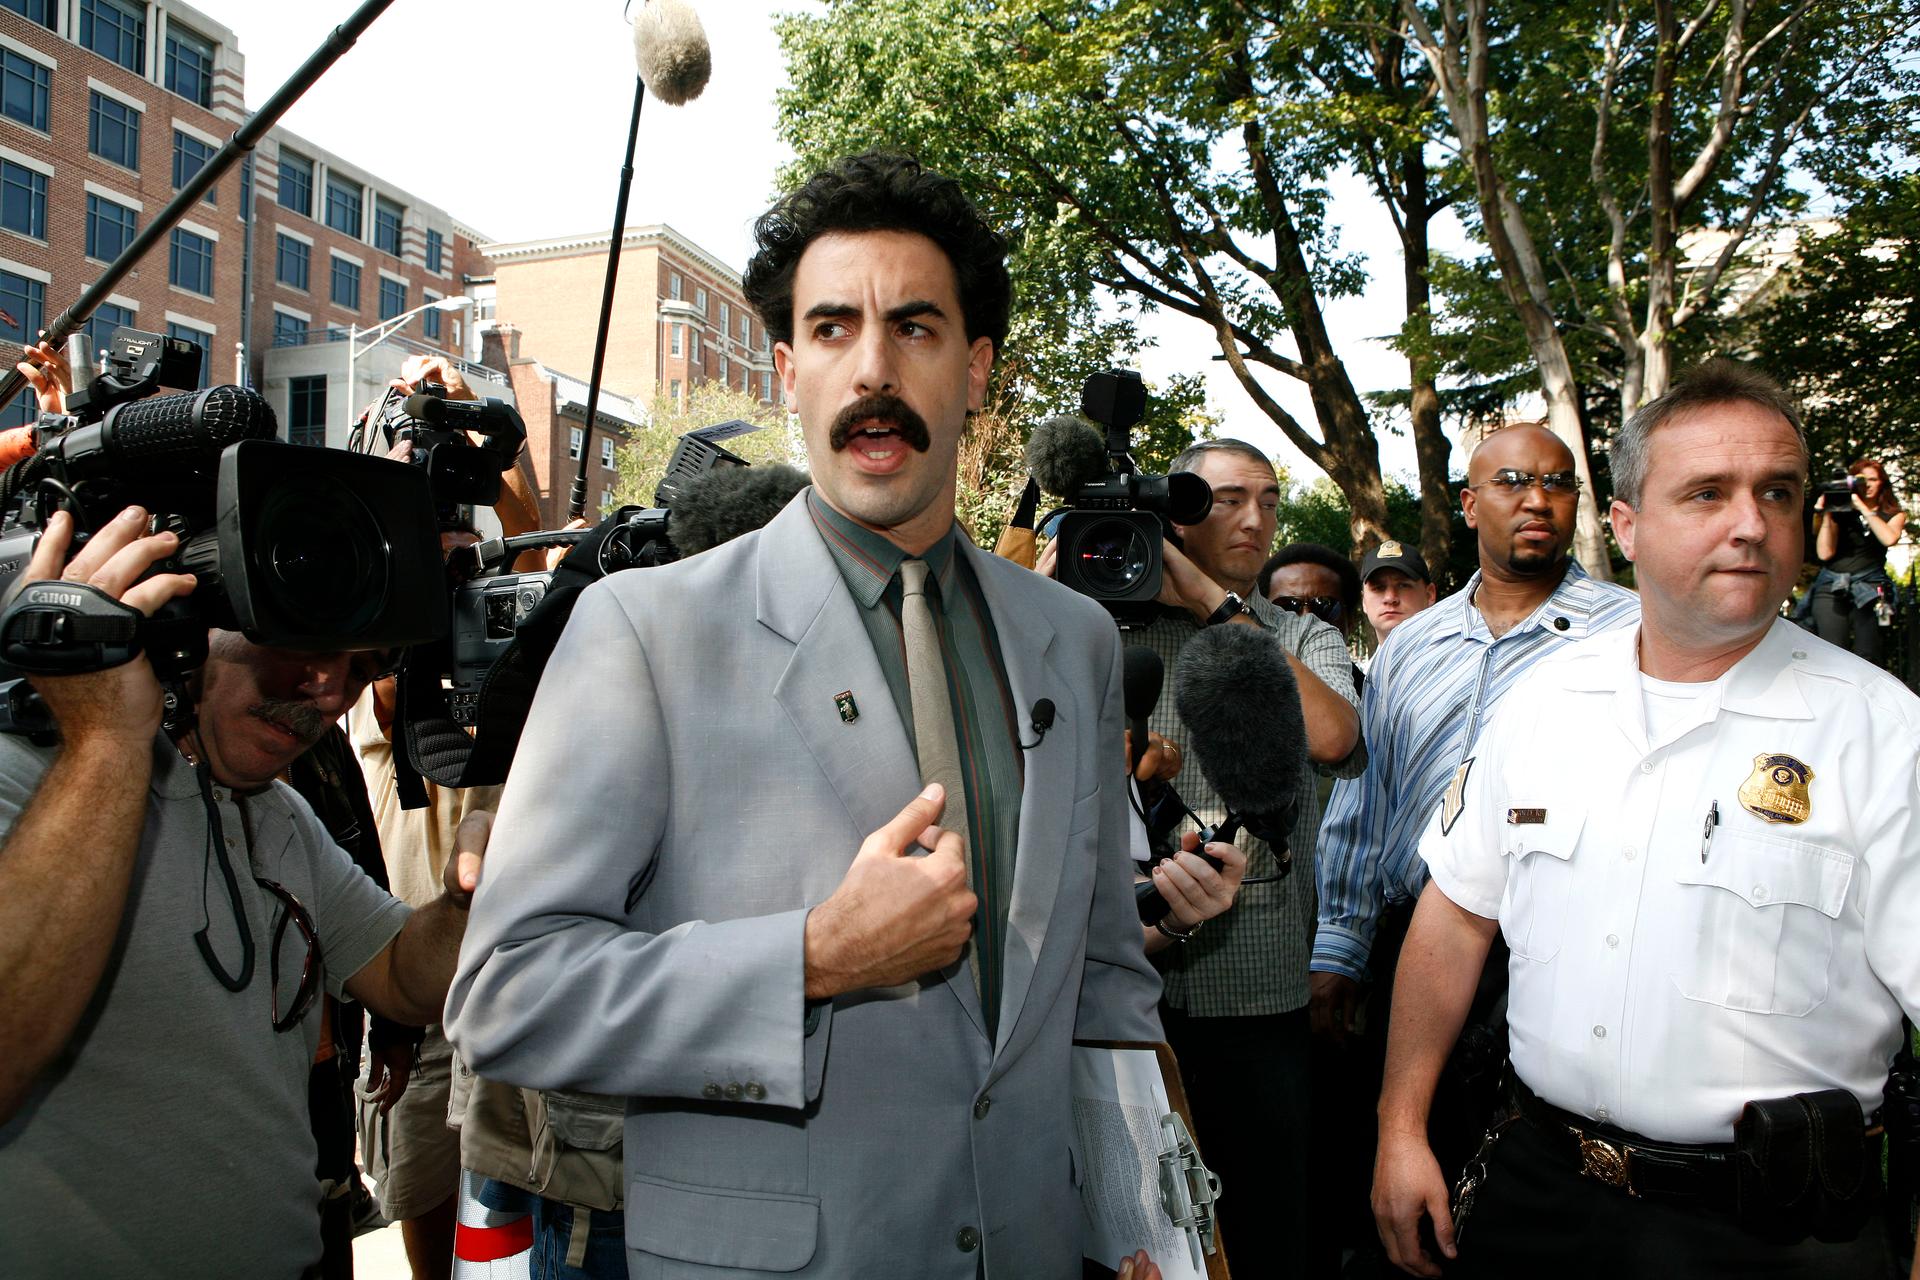 Actor Sacha Baron Cohen (C) in the role of fictitious Kazakh journalist Borat Sagdiyev is turned away from the Kazakh Embassy in Washington, September 28, 2006.